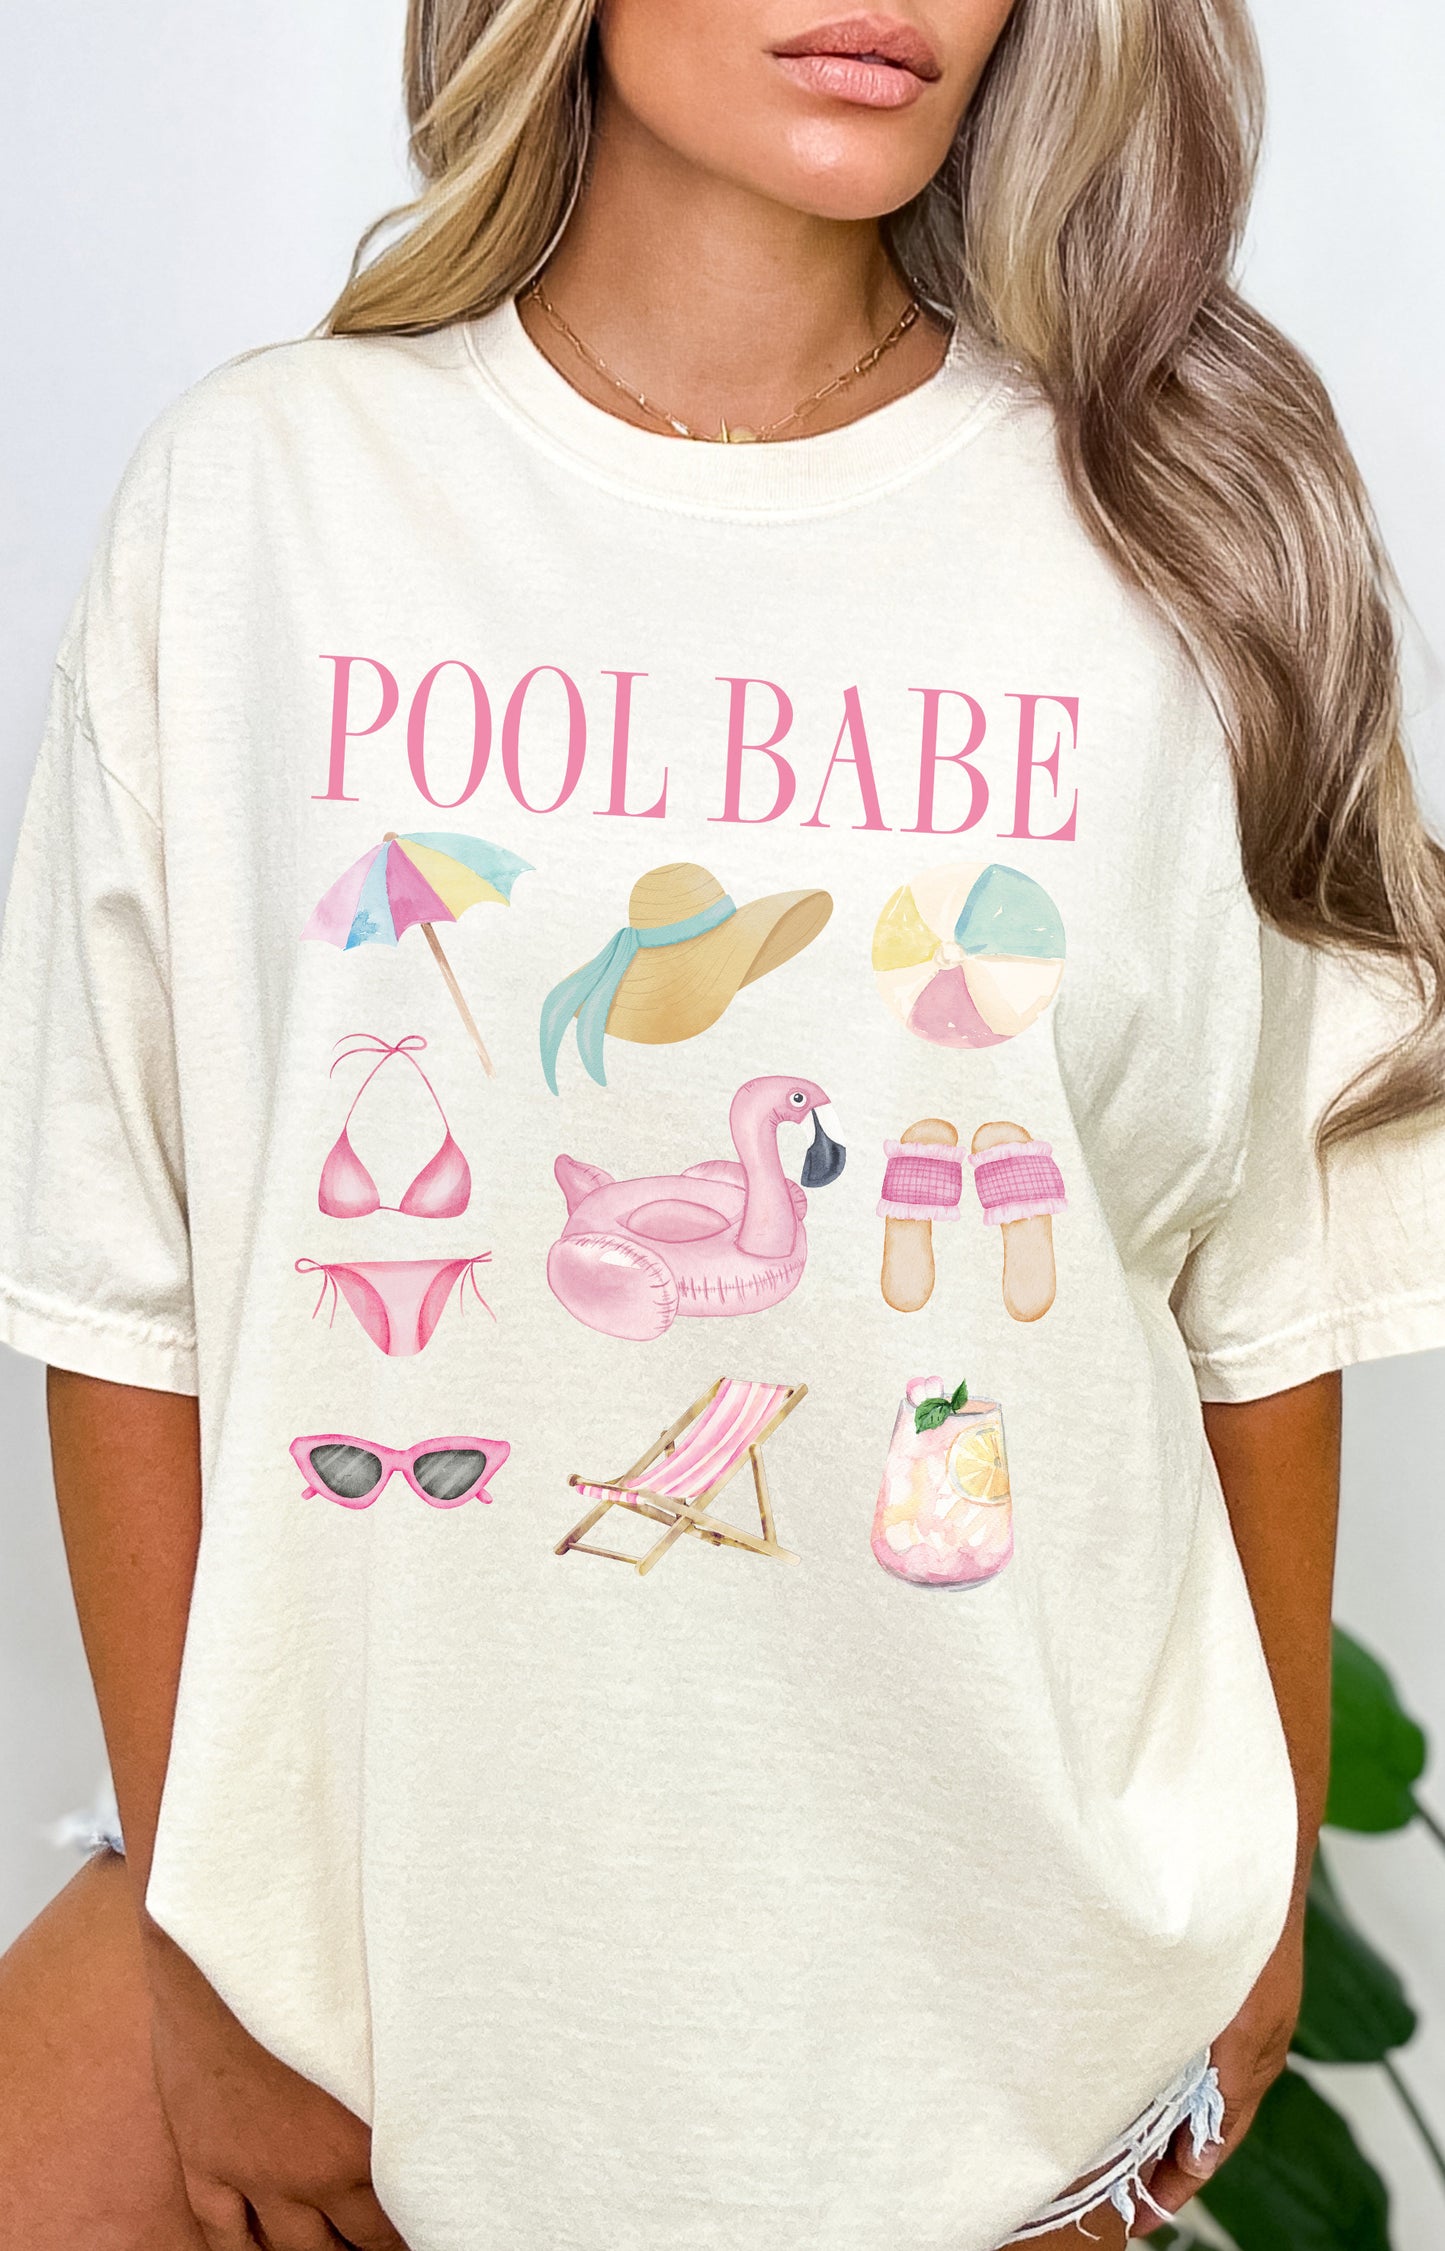 Pool Babe Garment Dyed Graphic Tee